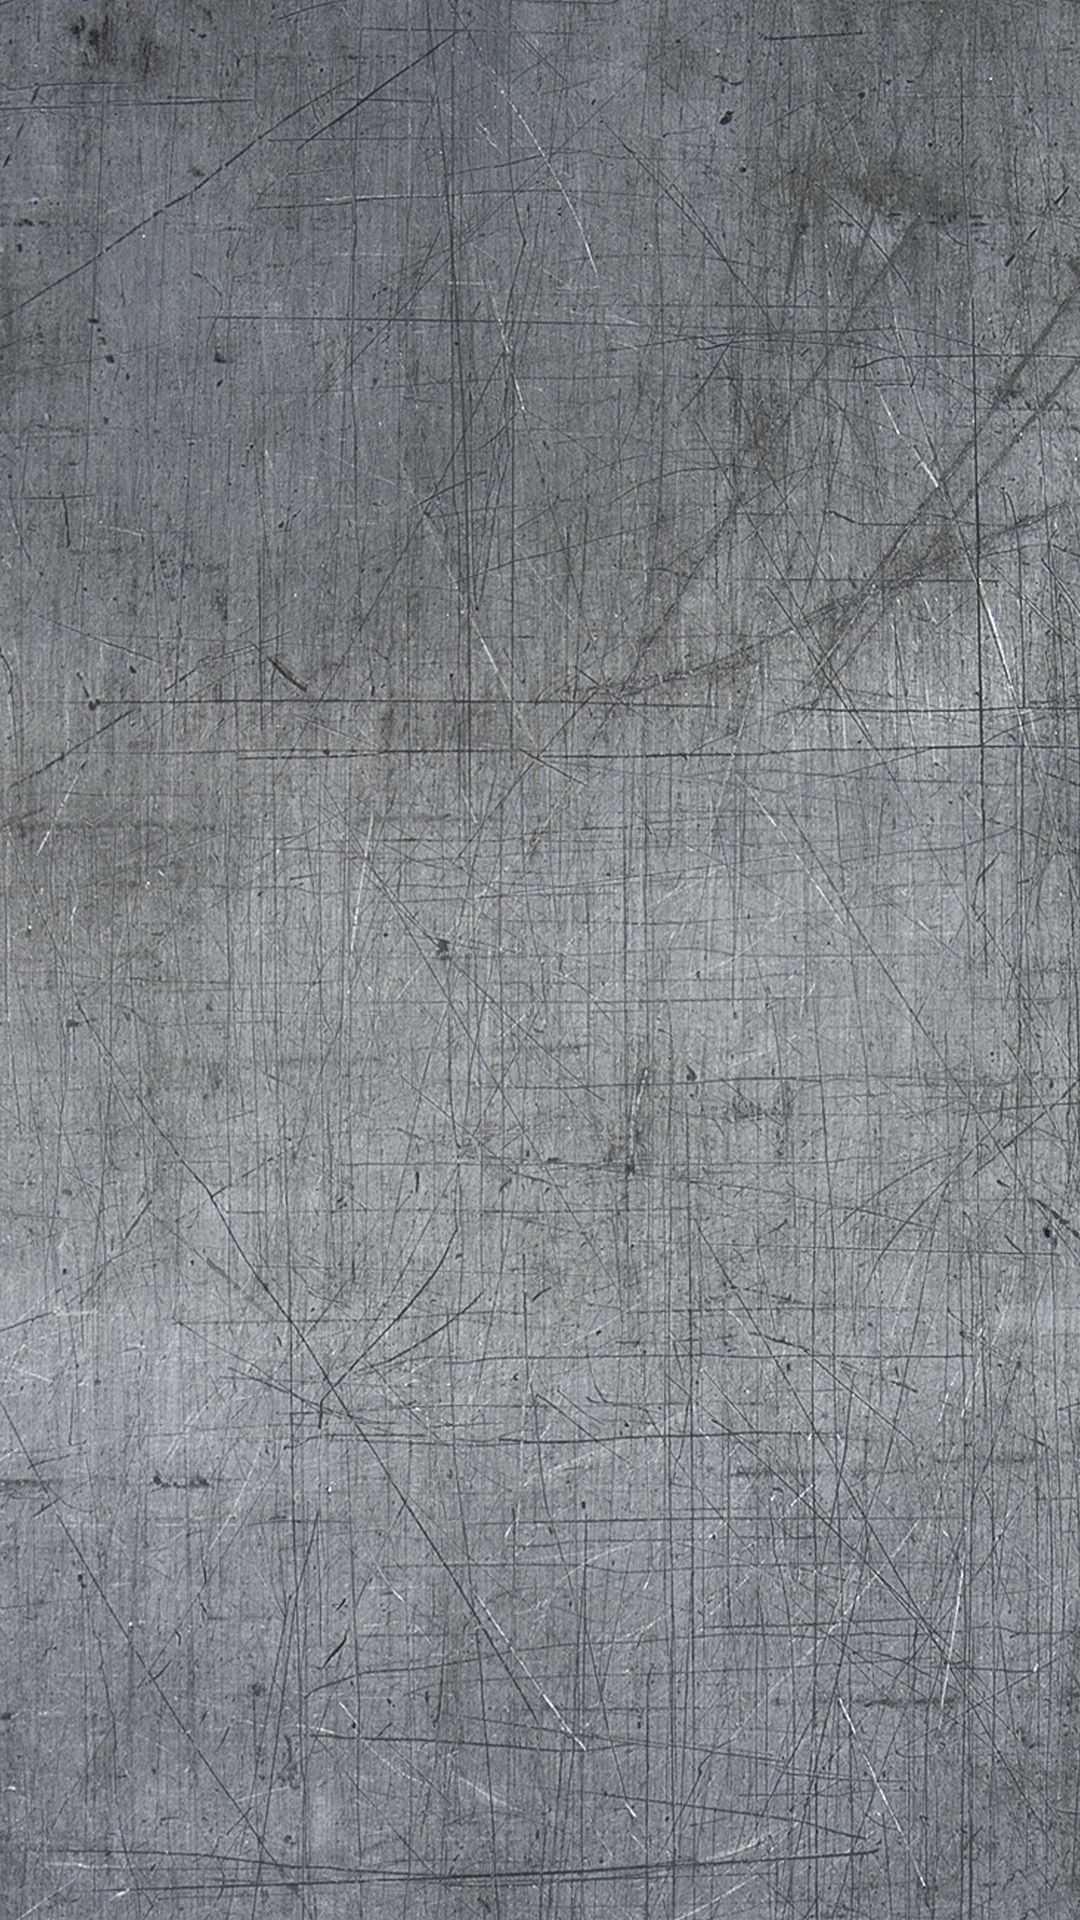 Scratched Gray Metal Surface Android Wallpaper. Metal texture